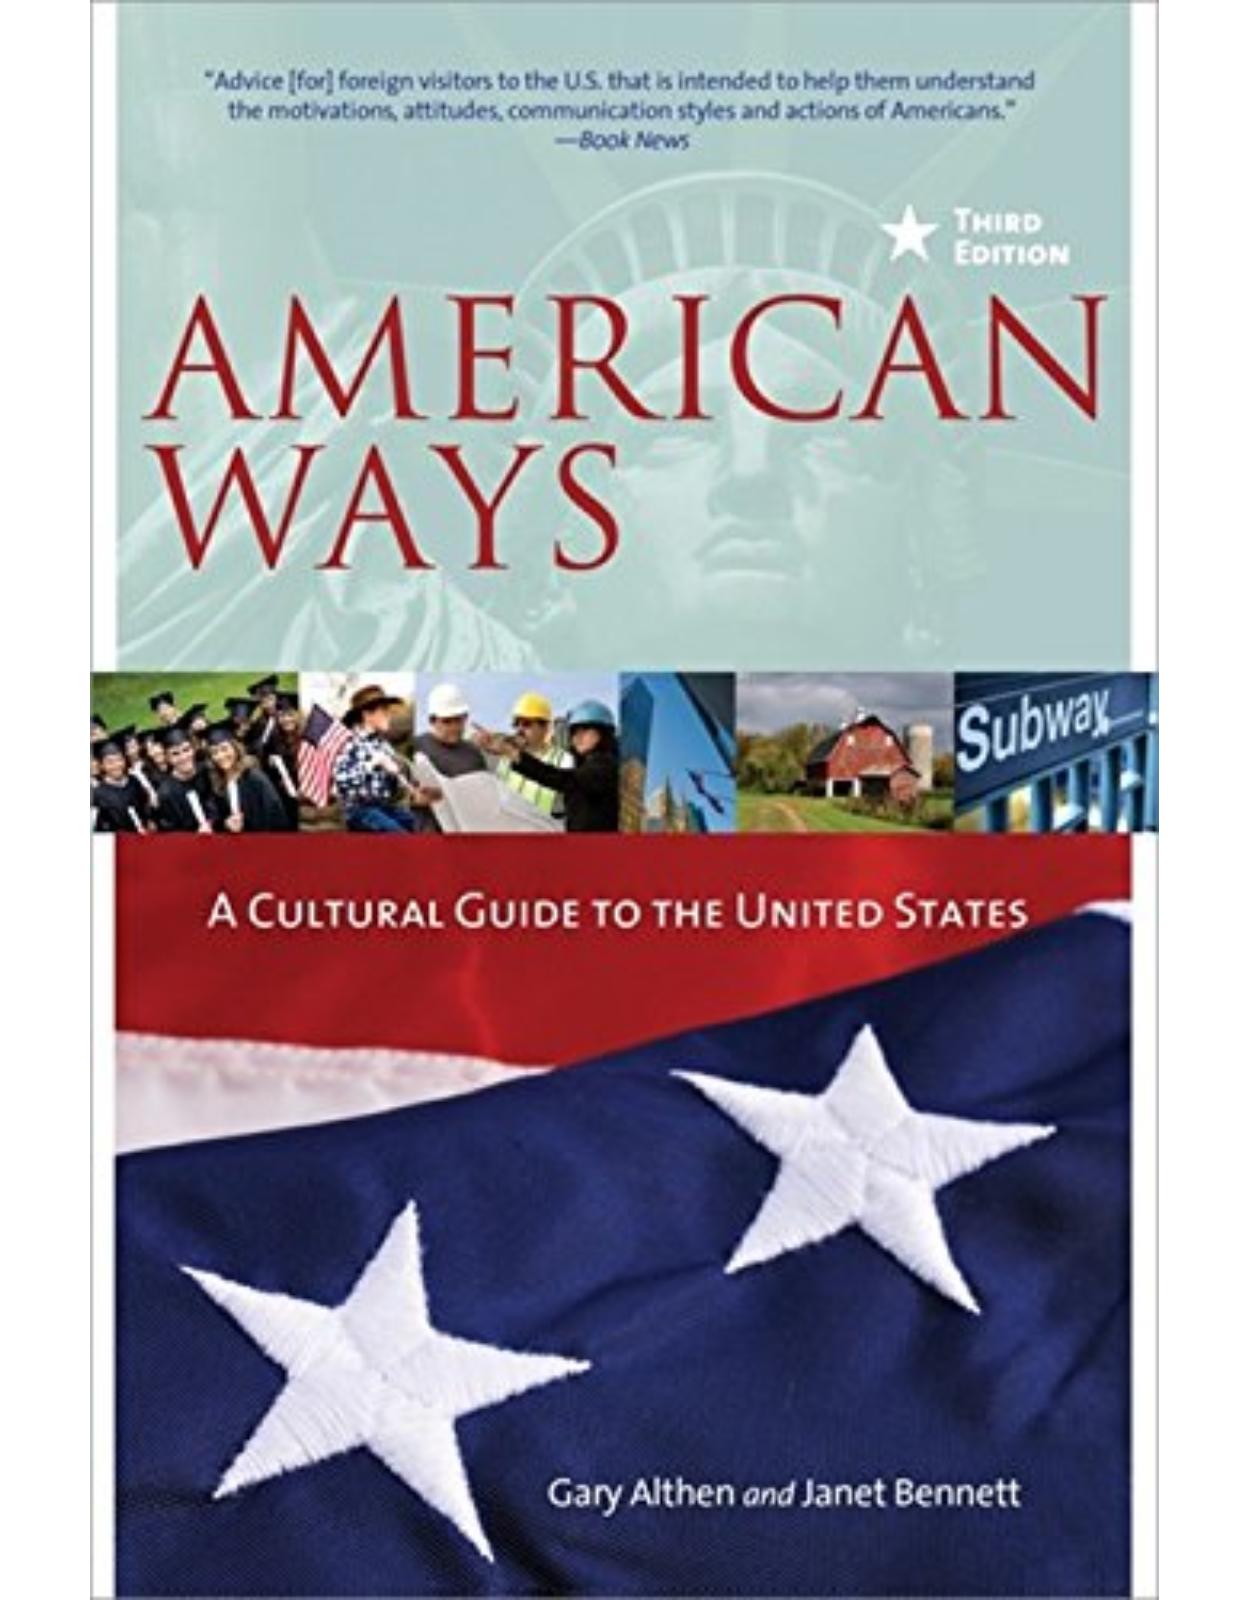 American Ways, Third Edition: A Cultural Guide to the United States of America